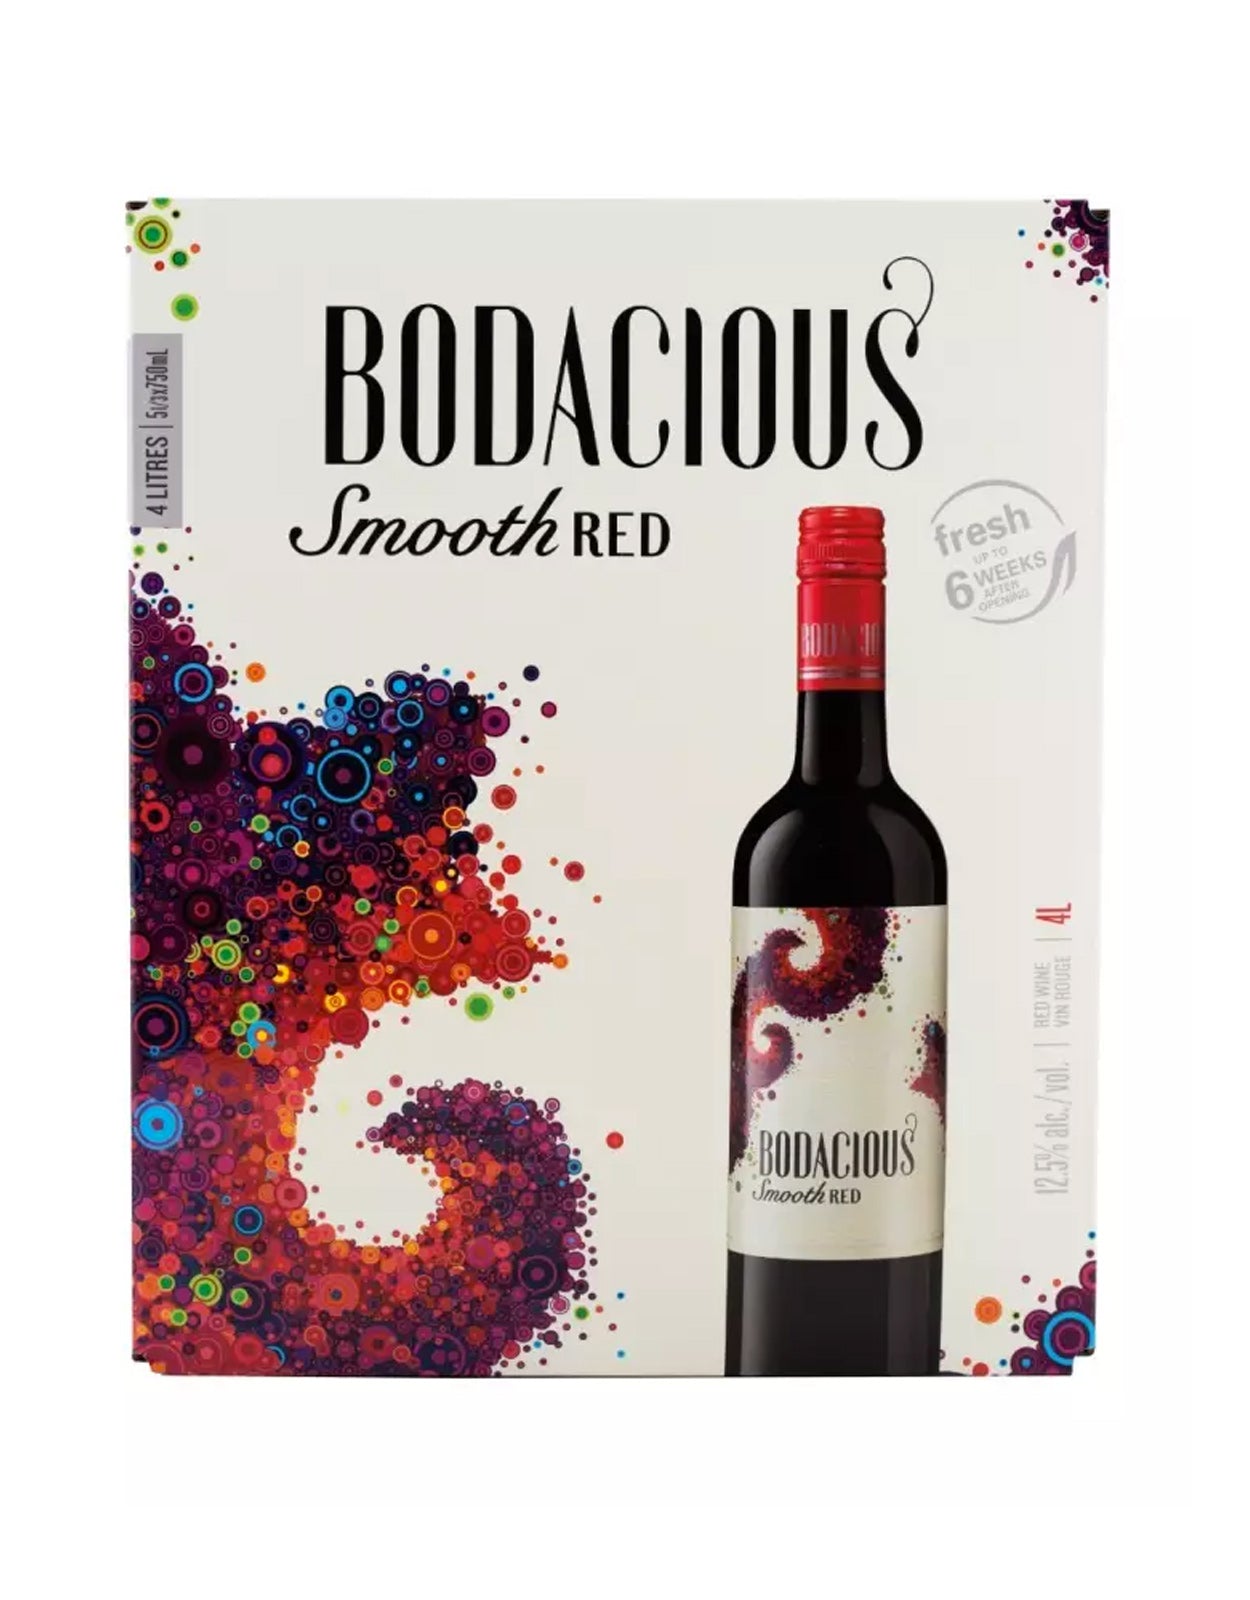 Bodacious Smooth Red - 4 Litre Box